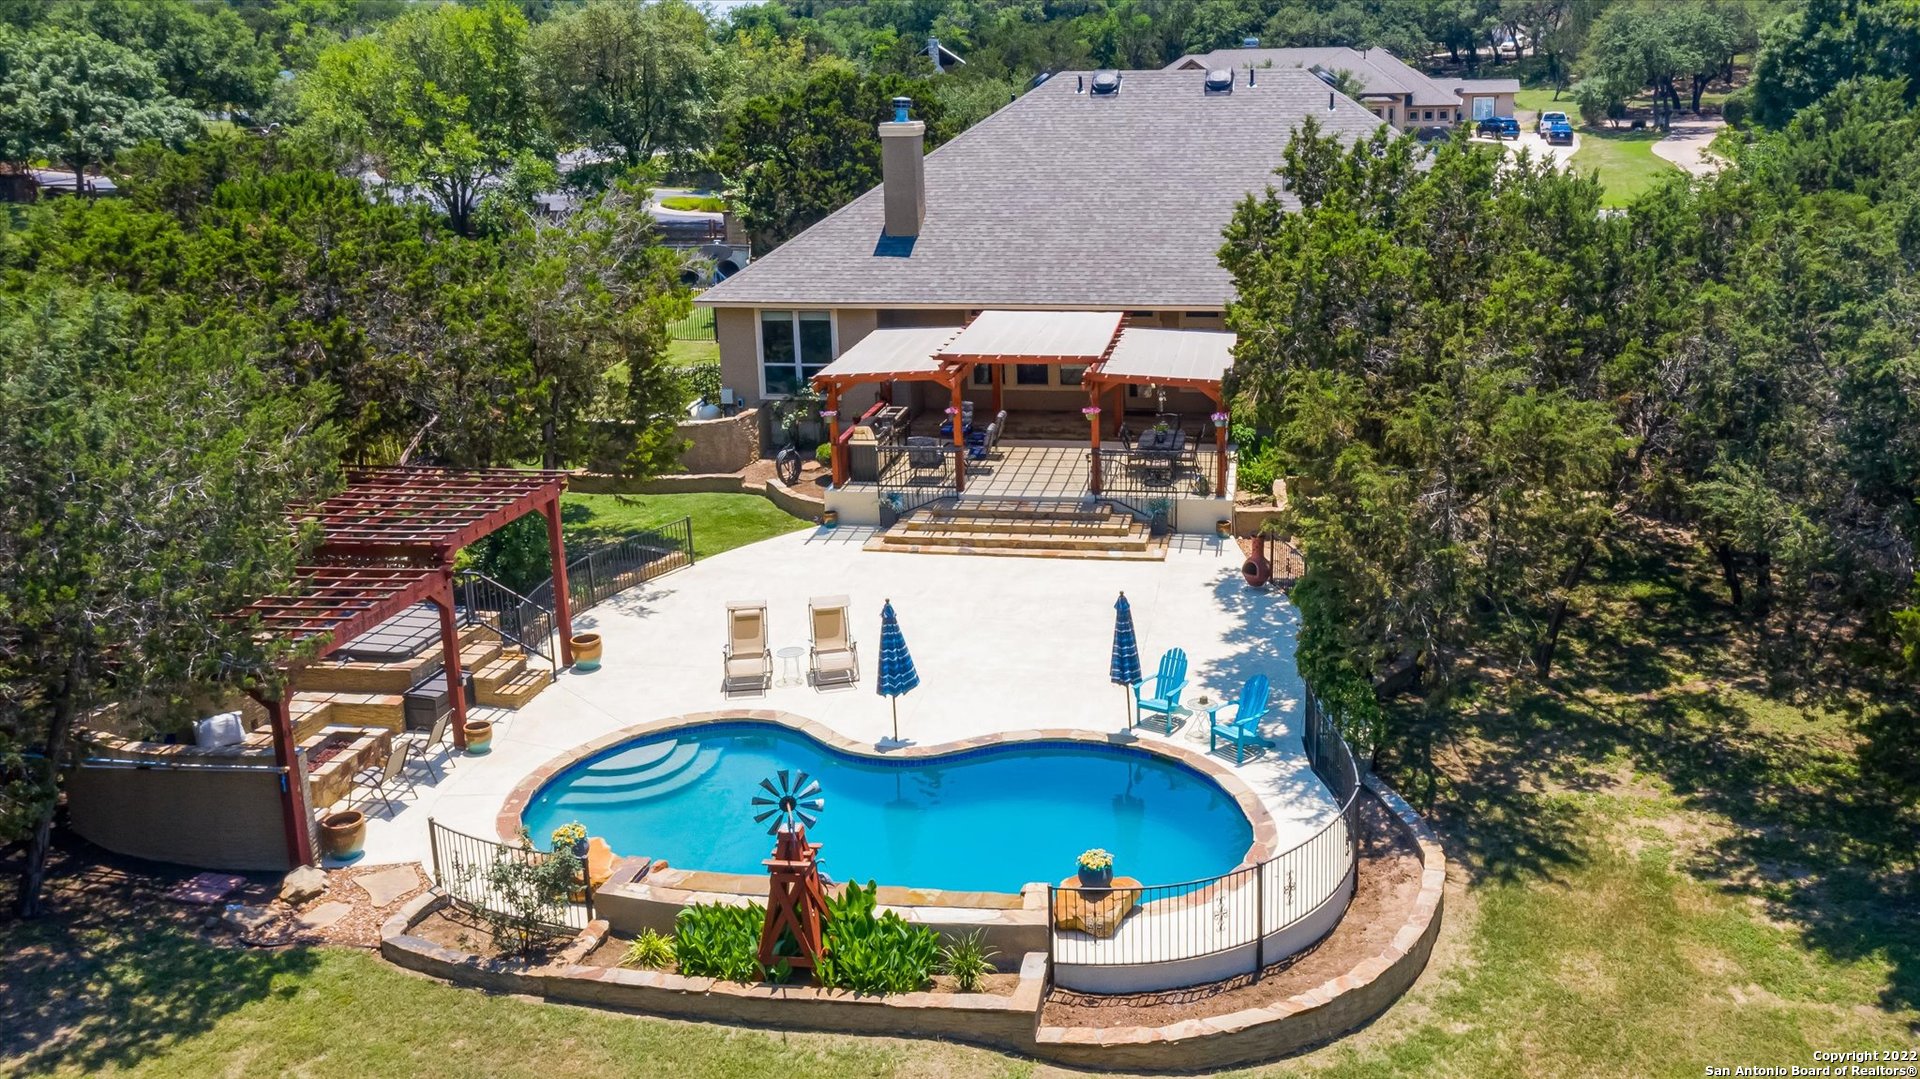 an aerial view of a house with outdoor space pool seating area and fire pit